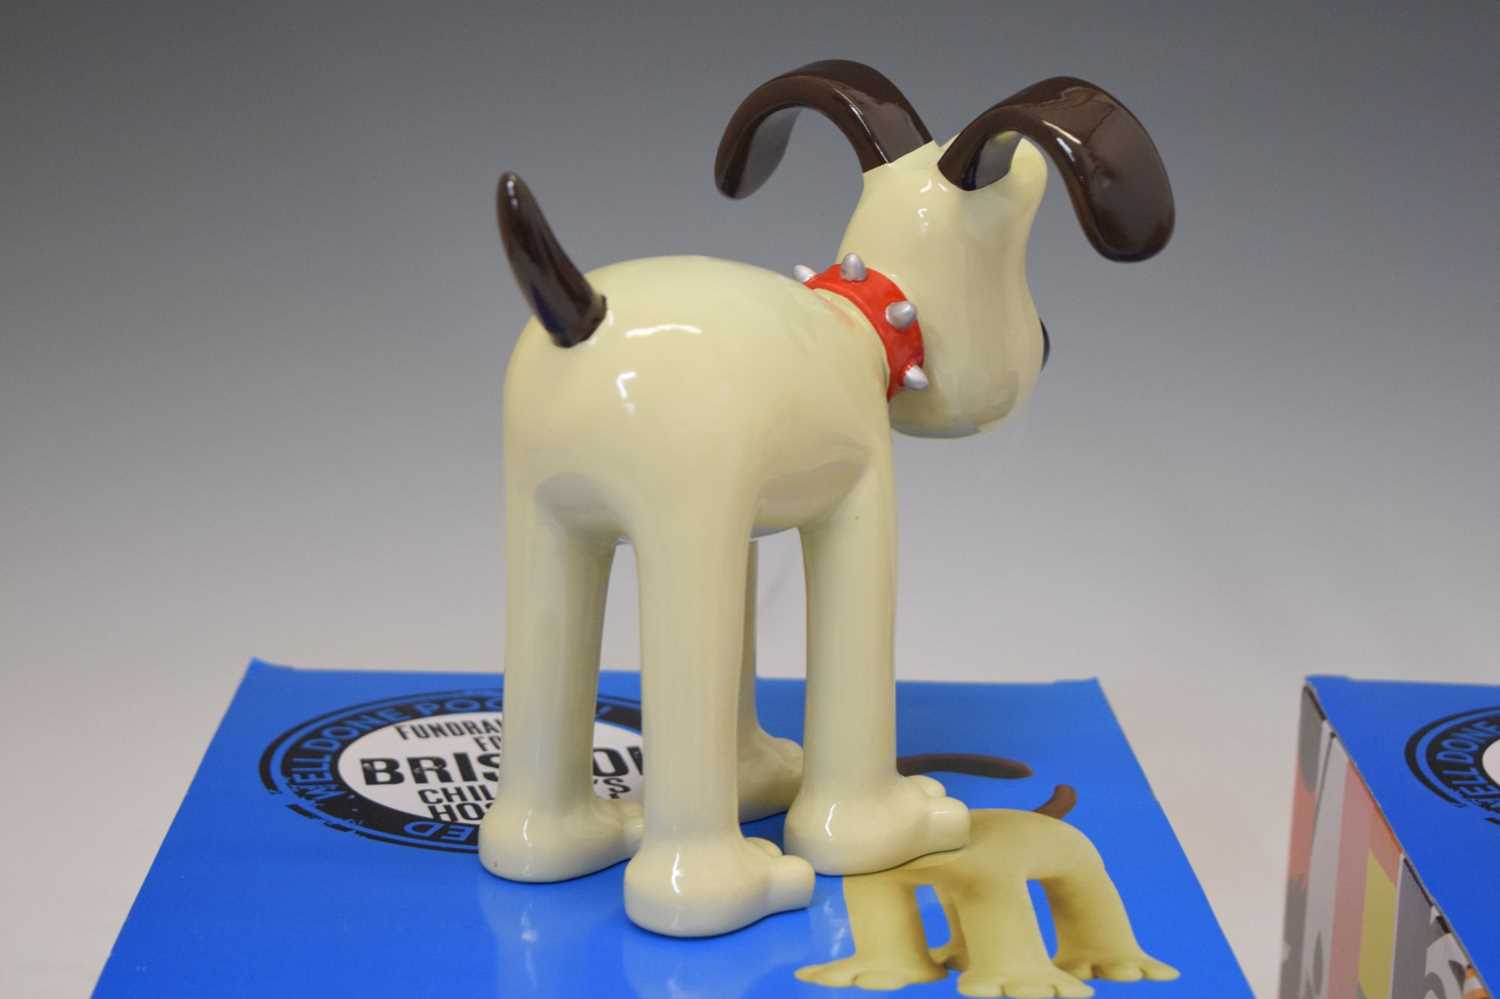 Aardman/Wallace and Gromit - 'Gromit Unleashed' figures - Image 4 of 8